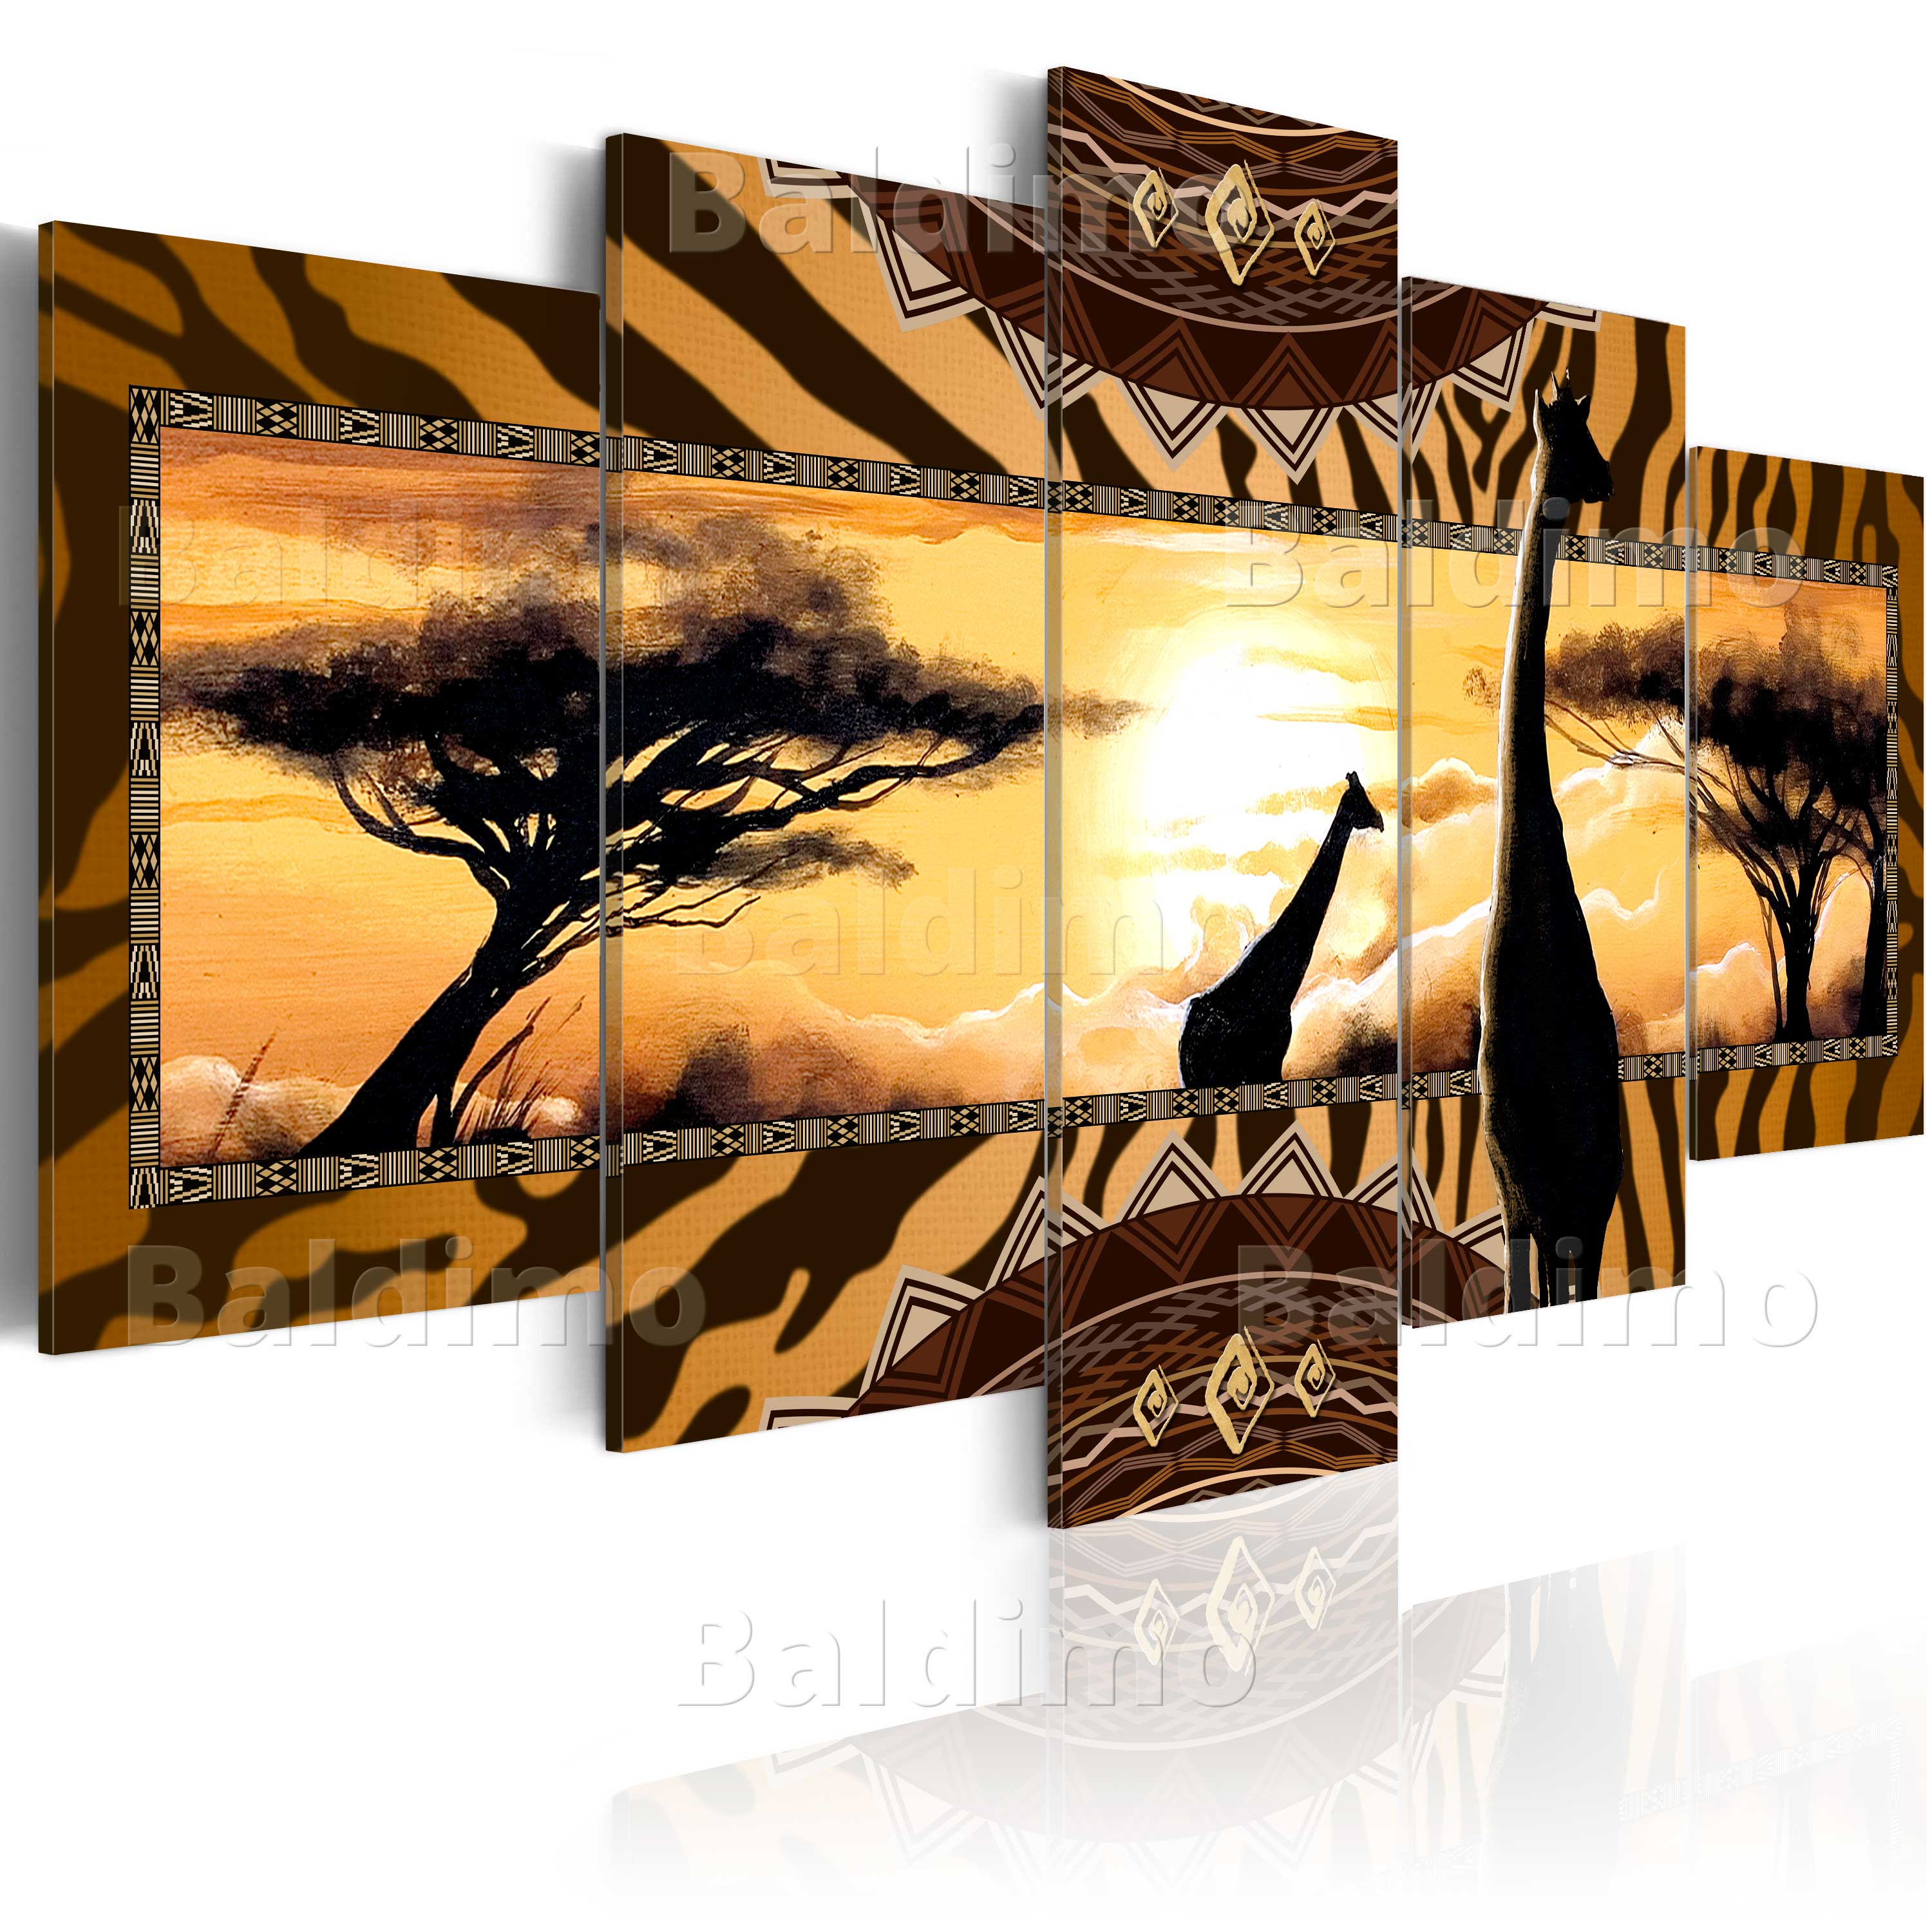 Wall Art Print Image Picture Photo Africa C A B M